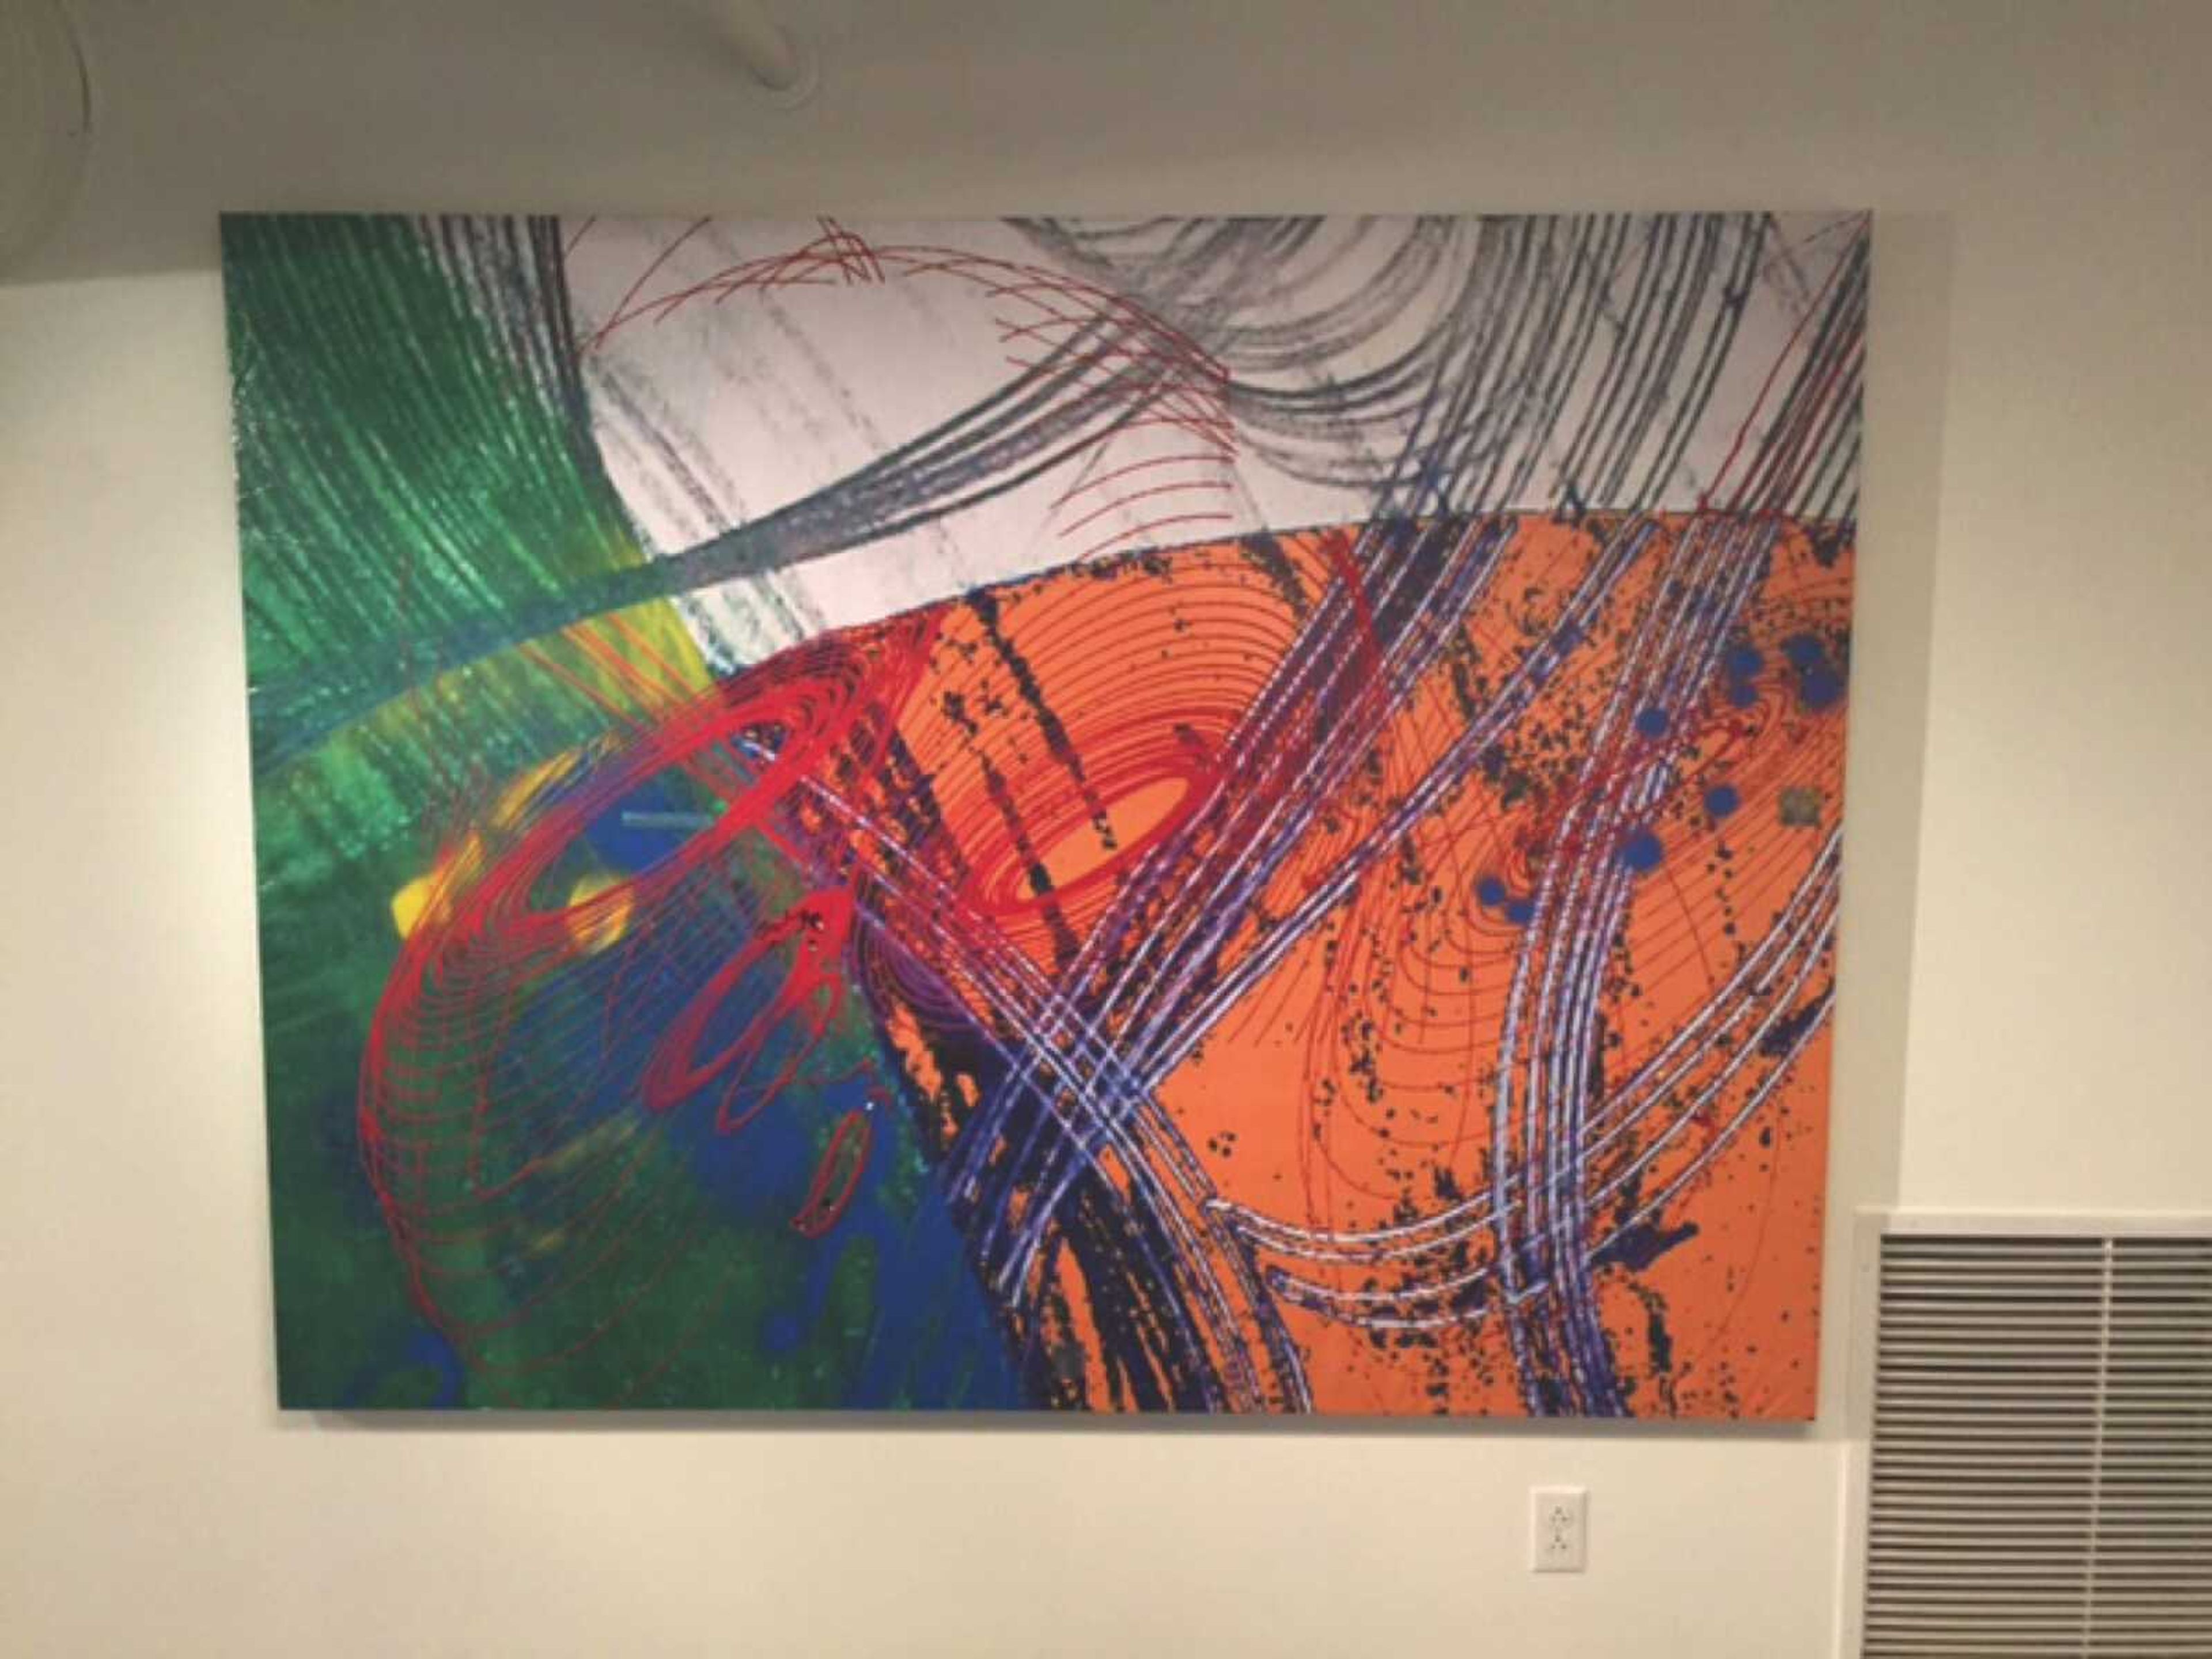 Ron Fondaw's exhibit "Shaky Ground" is on display through March 22 in the River Campus Art Gallery.